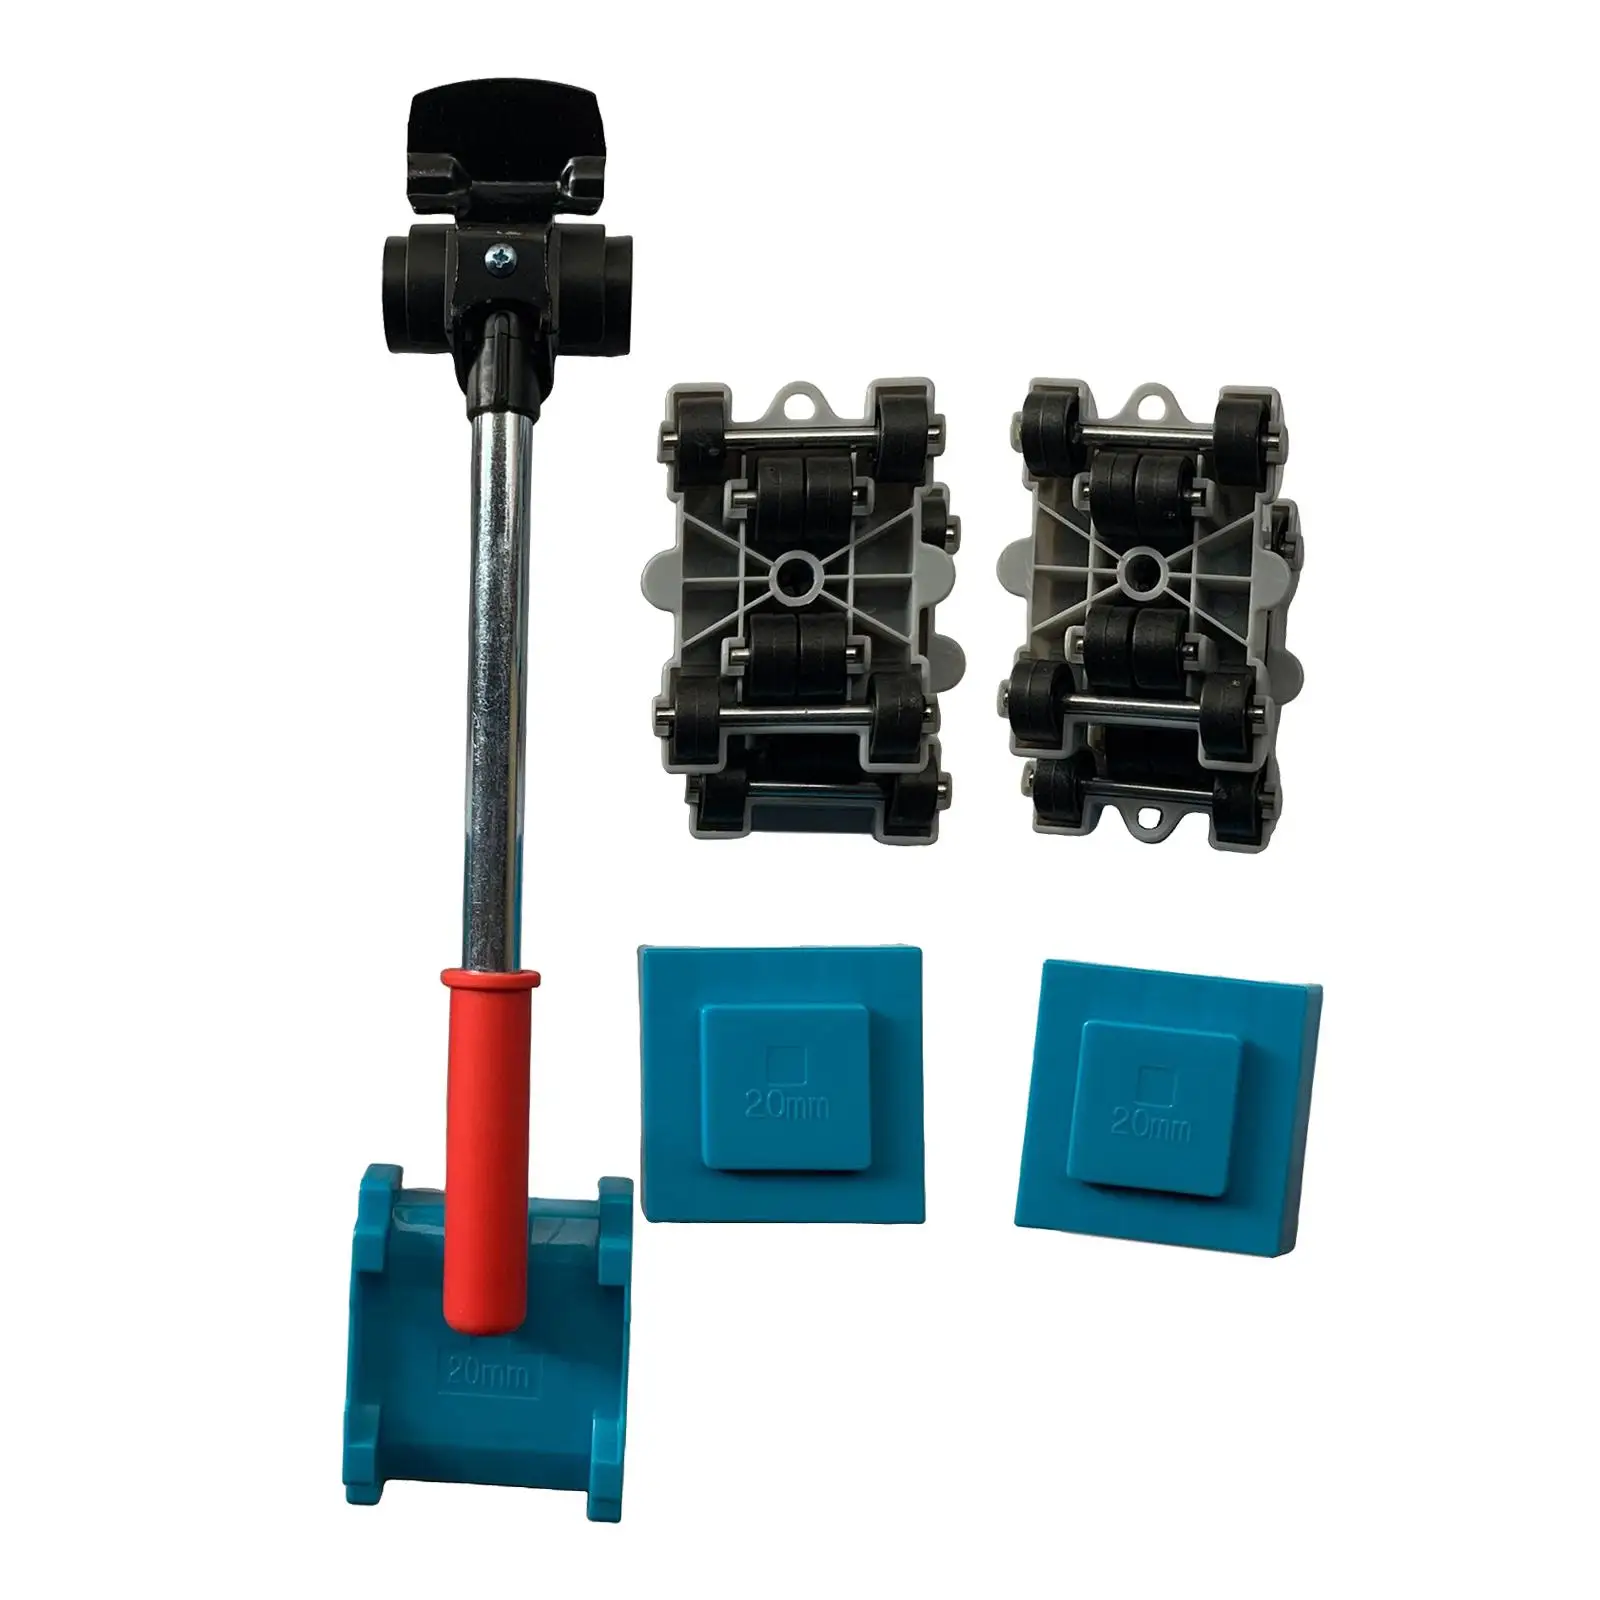 Portable Furniture Lifter Multifunctional Roller tools Moving and Lifting System Heavy Duty for Moving Sofas Wardrobes